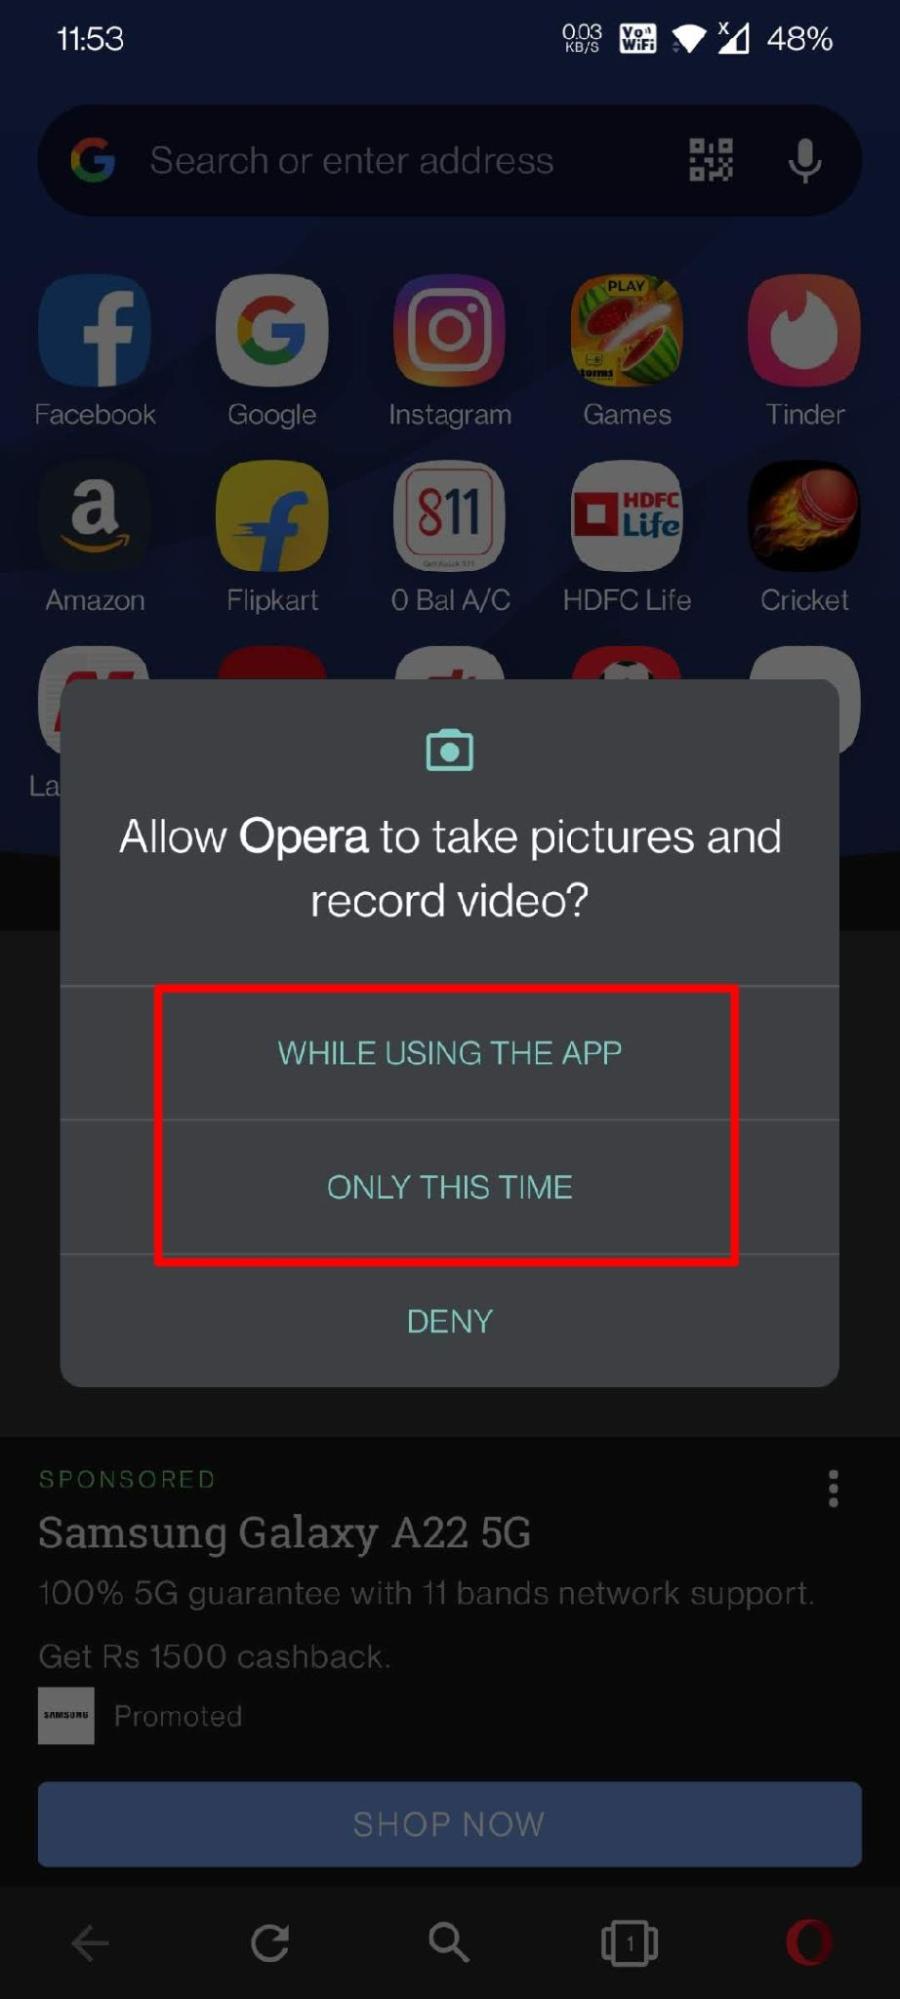 Allow Camera access to Opera mobile for QR code scan